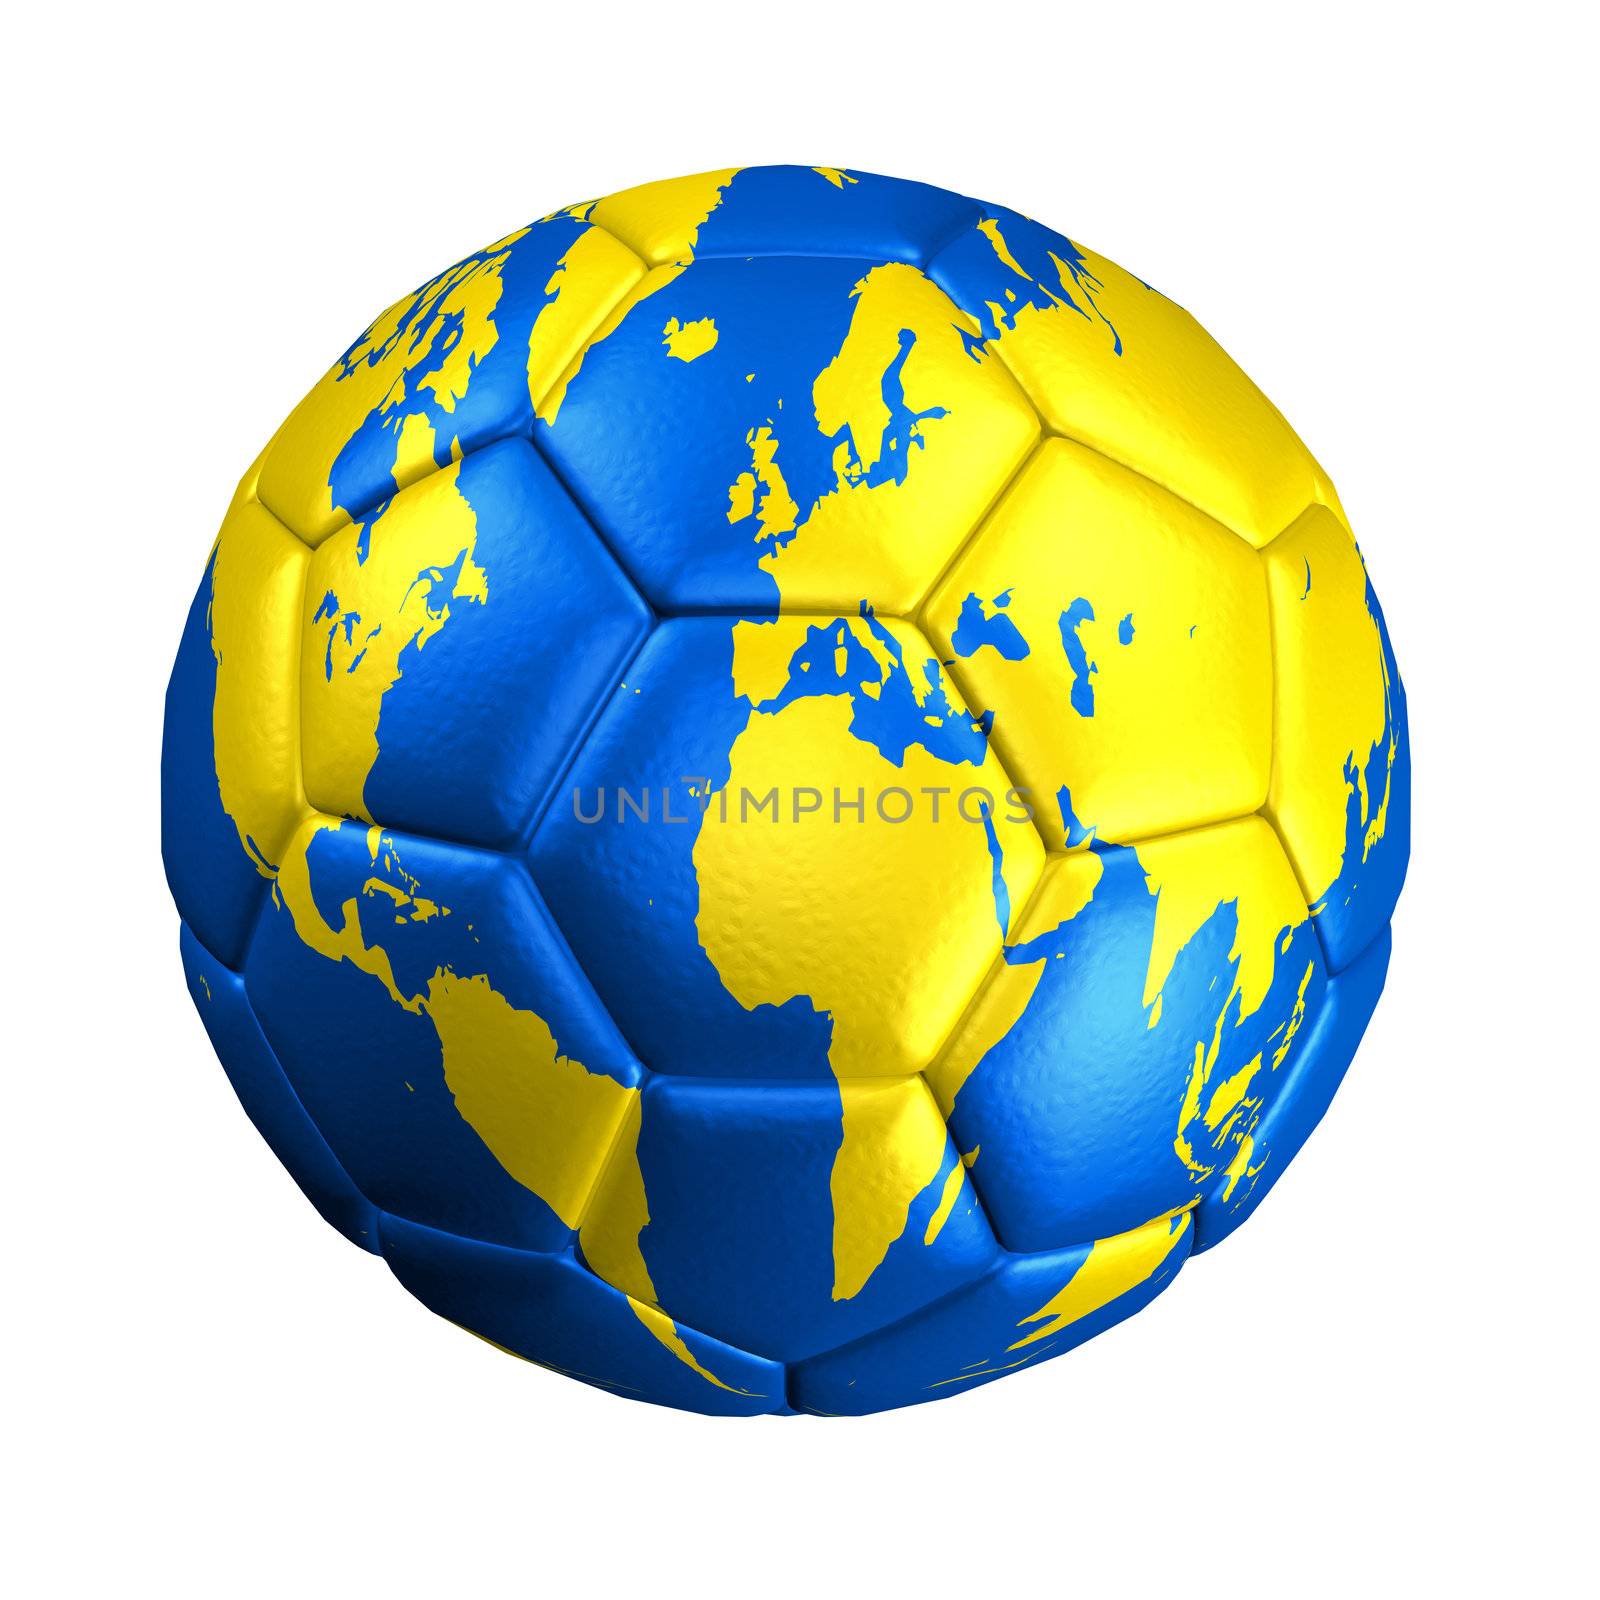 An image of an isolated soccer ball with the world map